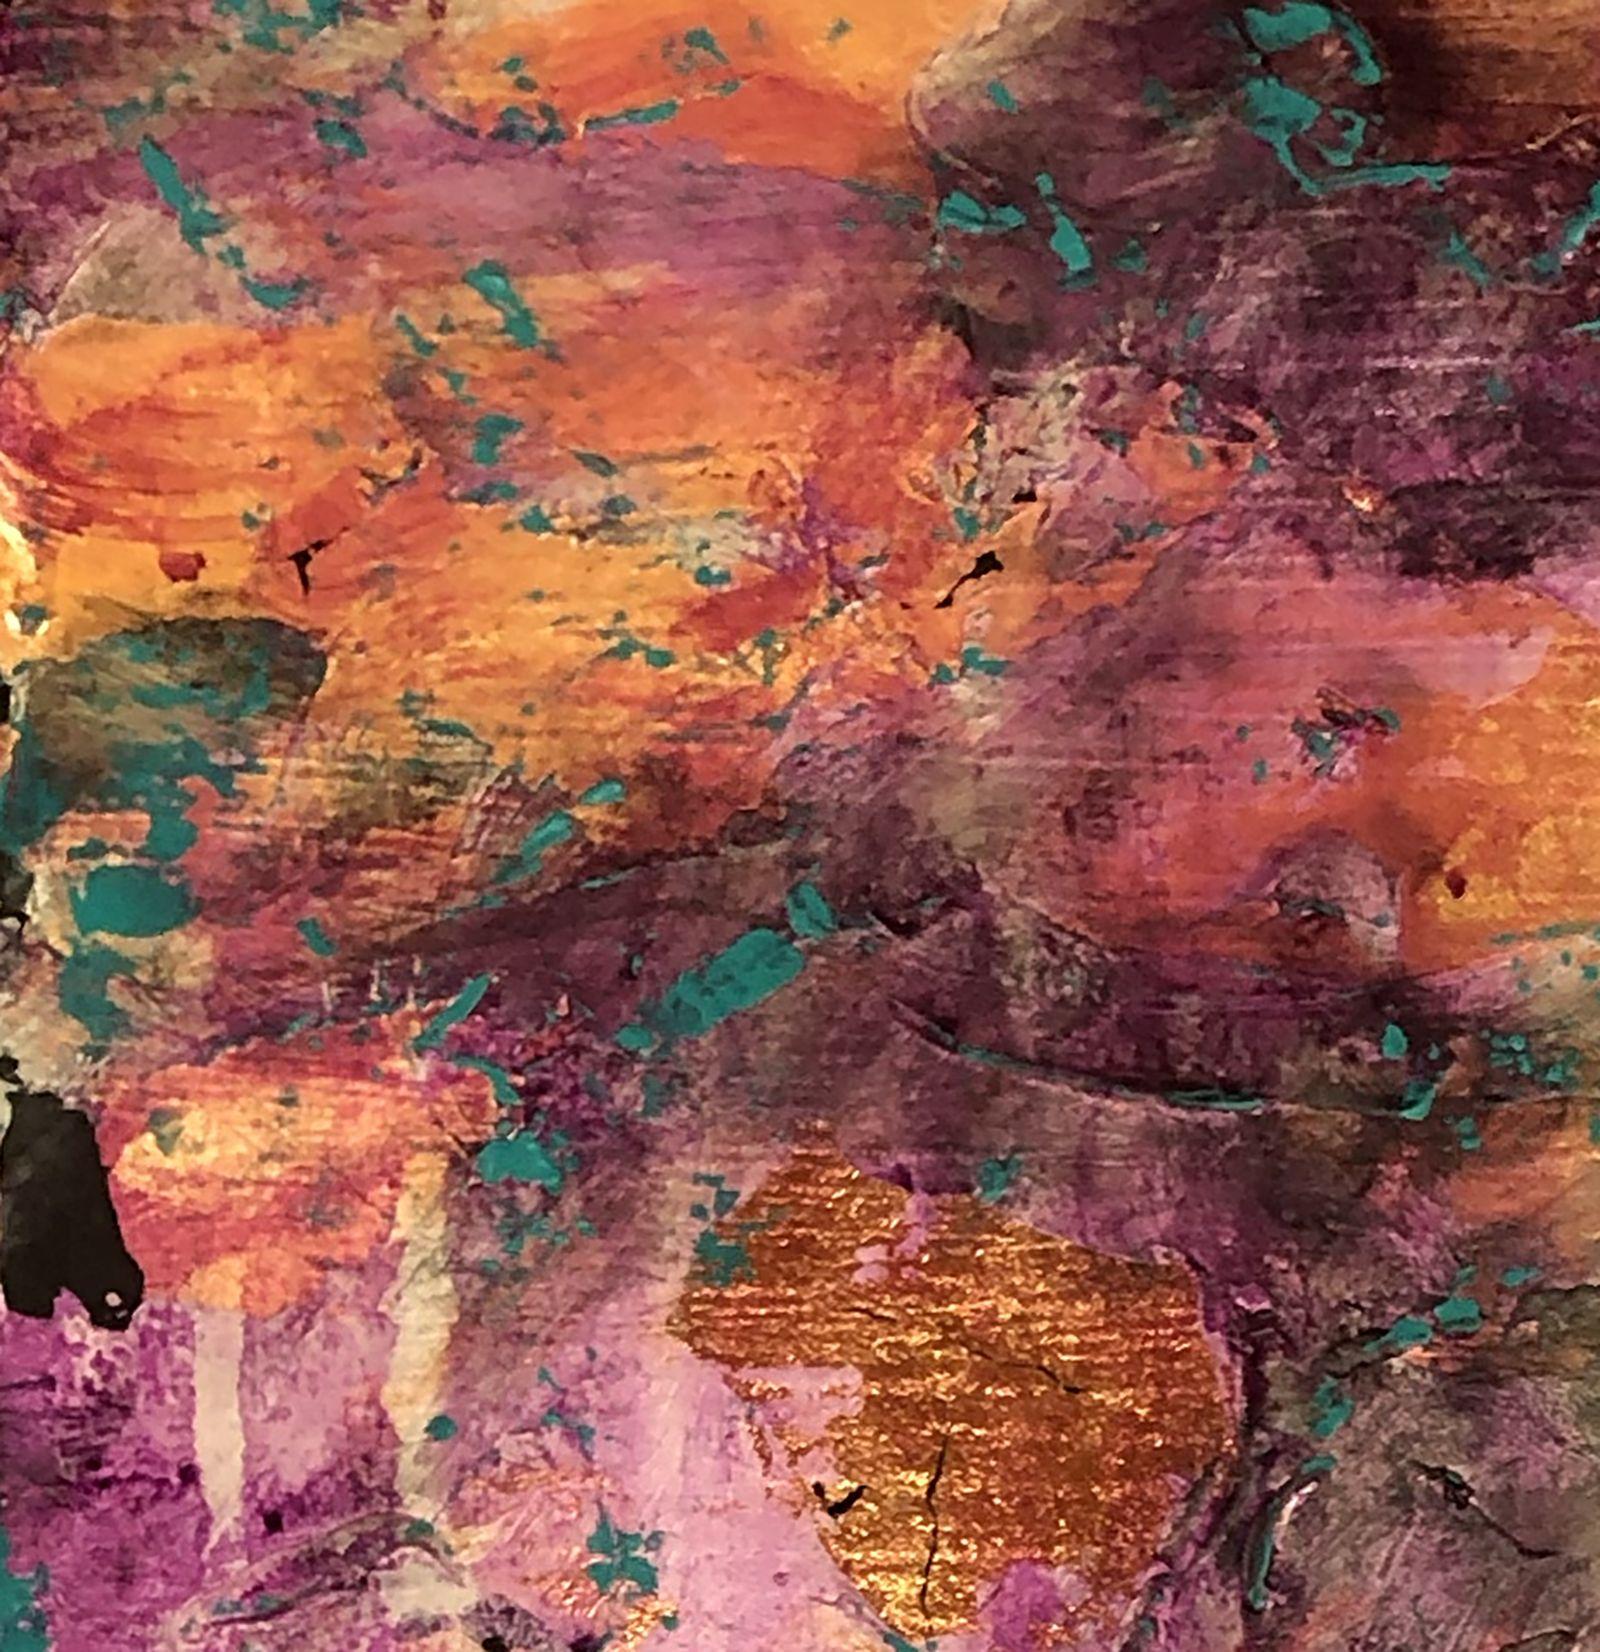 gaia 67, Mixed Media on Paper - Abstract Expressionist Mixed Media Art by Jason Lincoln Jeffers